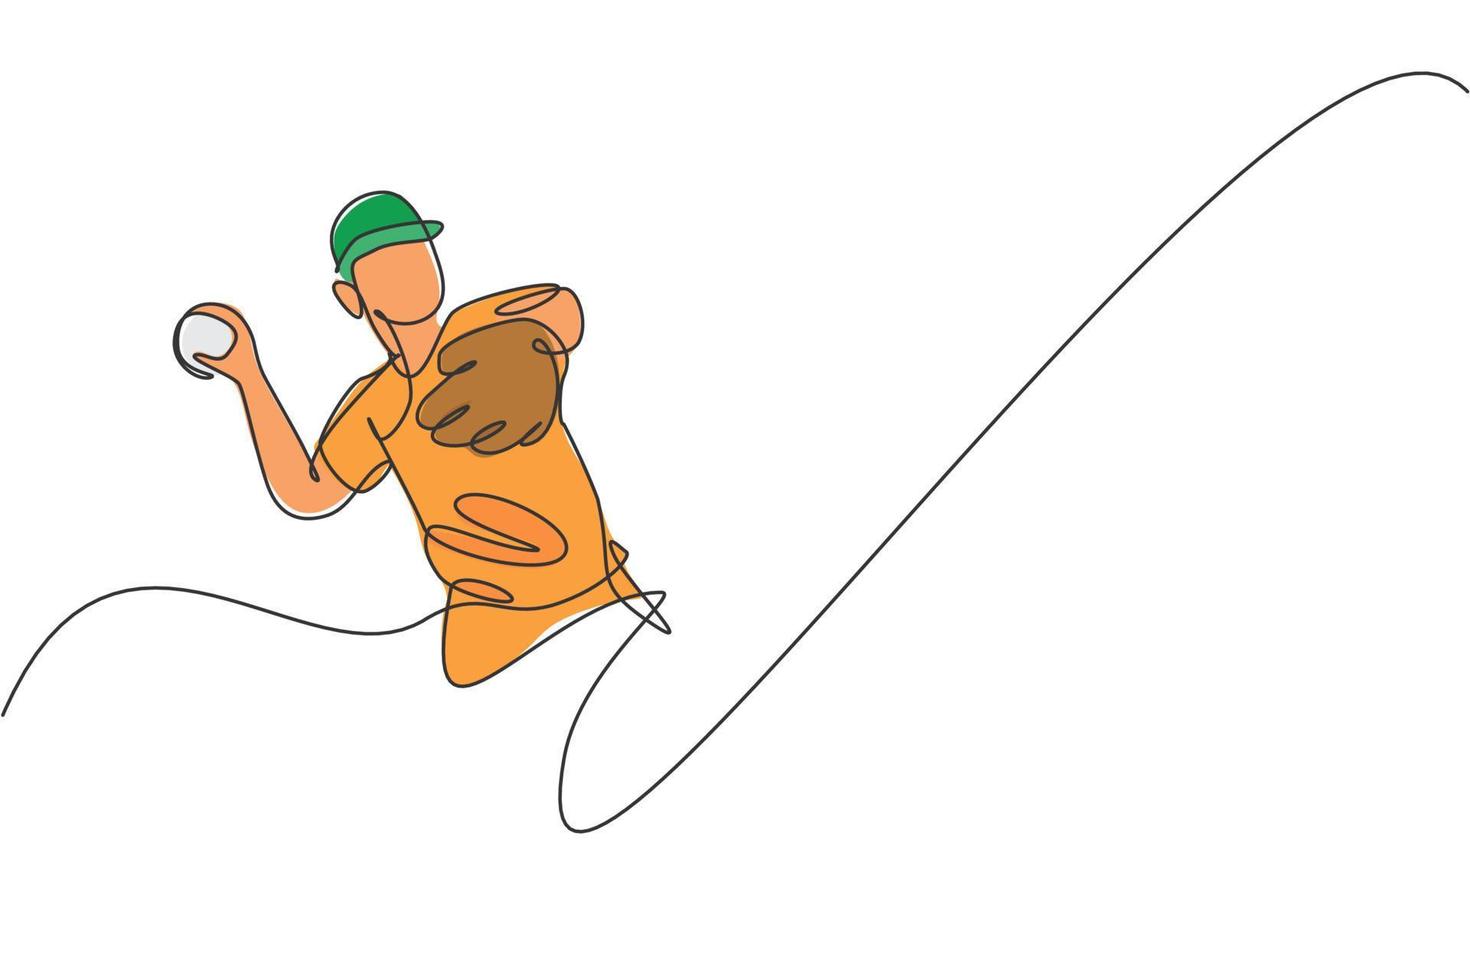 One single line drawing young energetic man baseball player throw the speed ball graphic vector illustration. Sport training concept. Modern continuous line draw design for baseball tournament banner